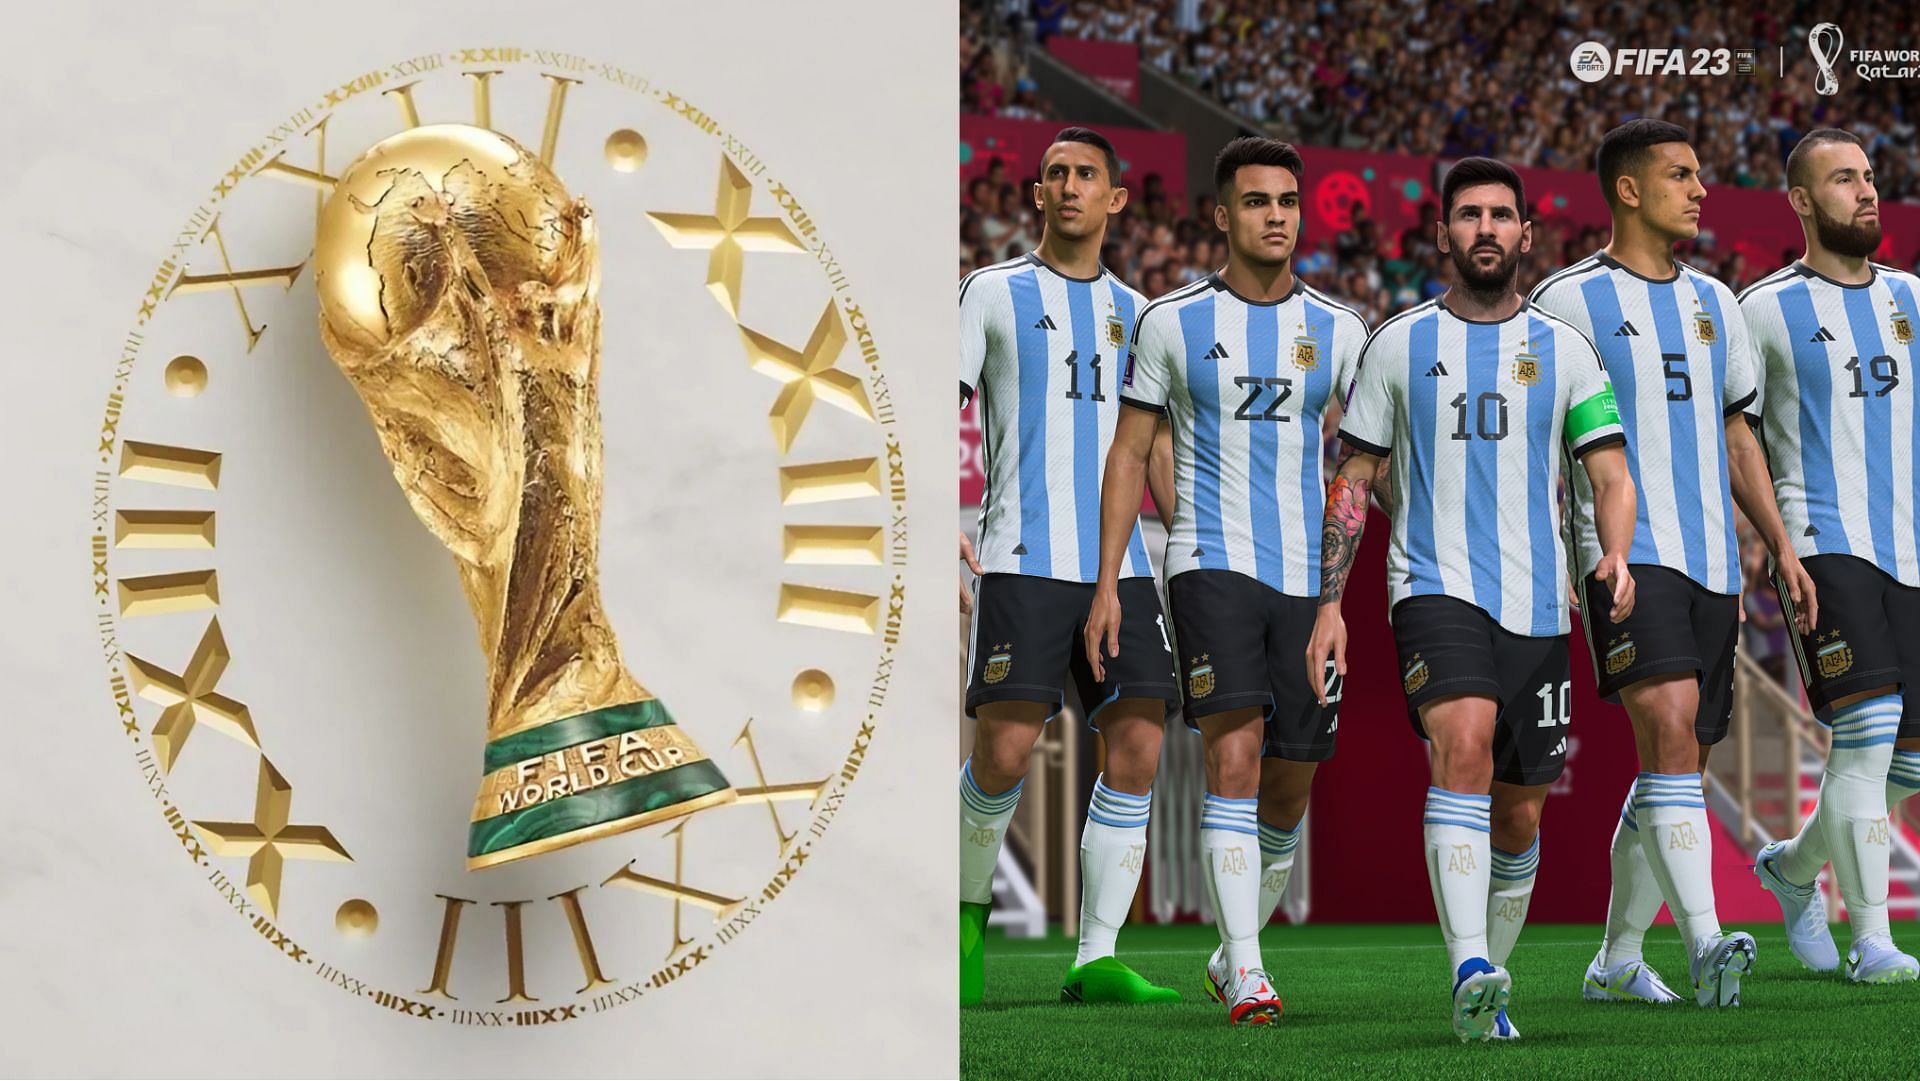 Who wins the World Cup 2022? FIFA 23 simulation predicts Messi and